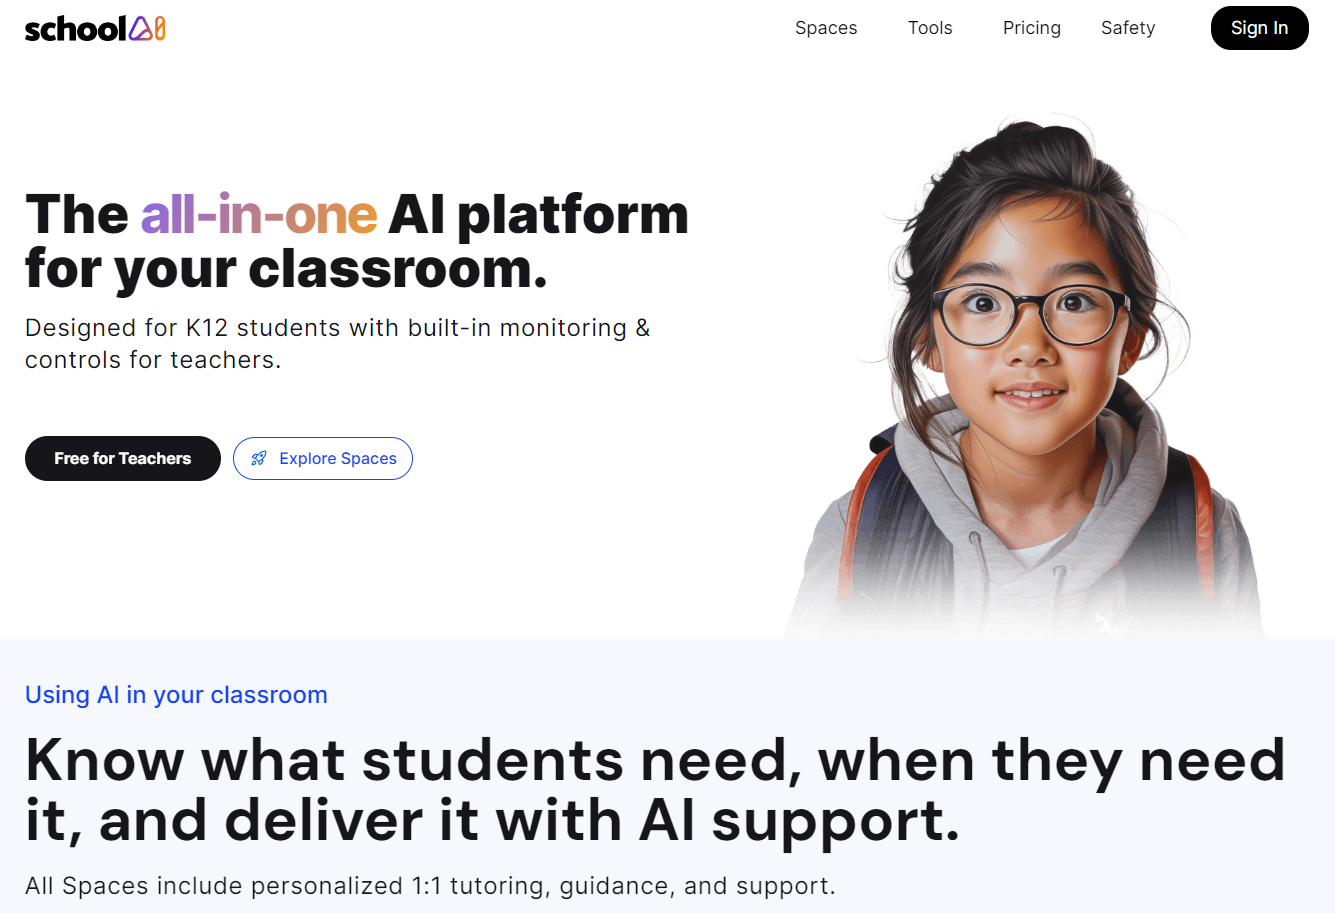 SchoolAI is an all-in-one AI platform for the classroom that's designed for K12 teachers and students